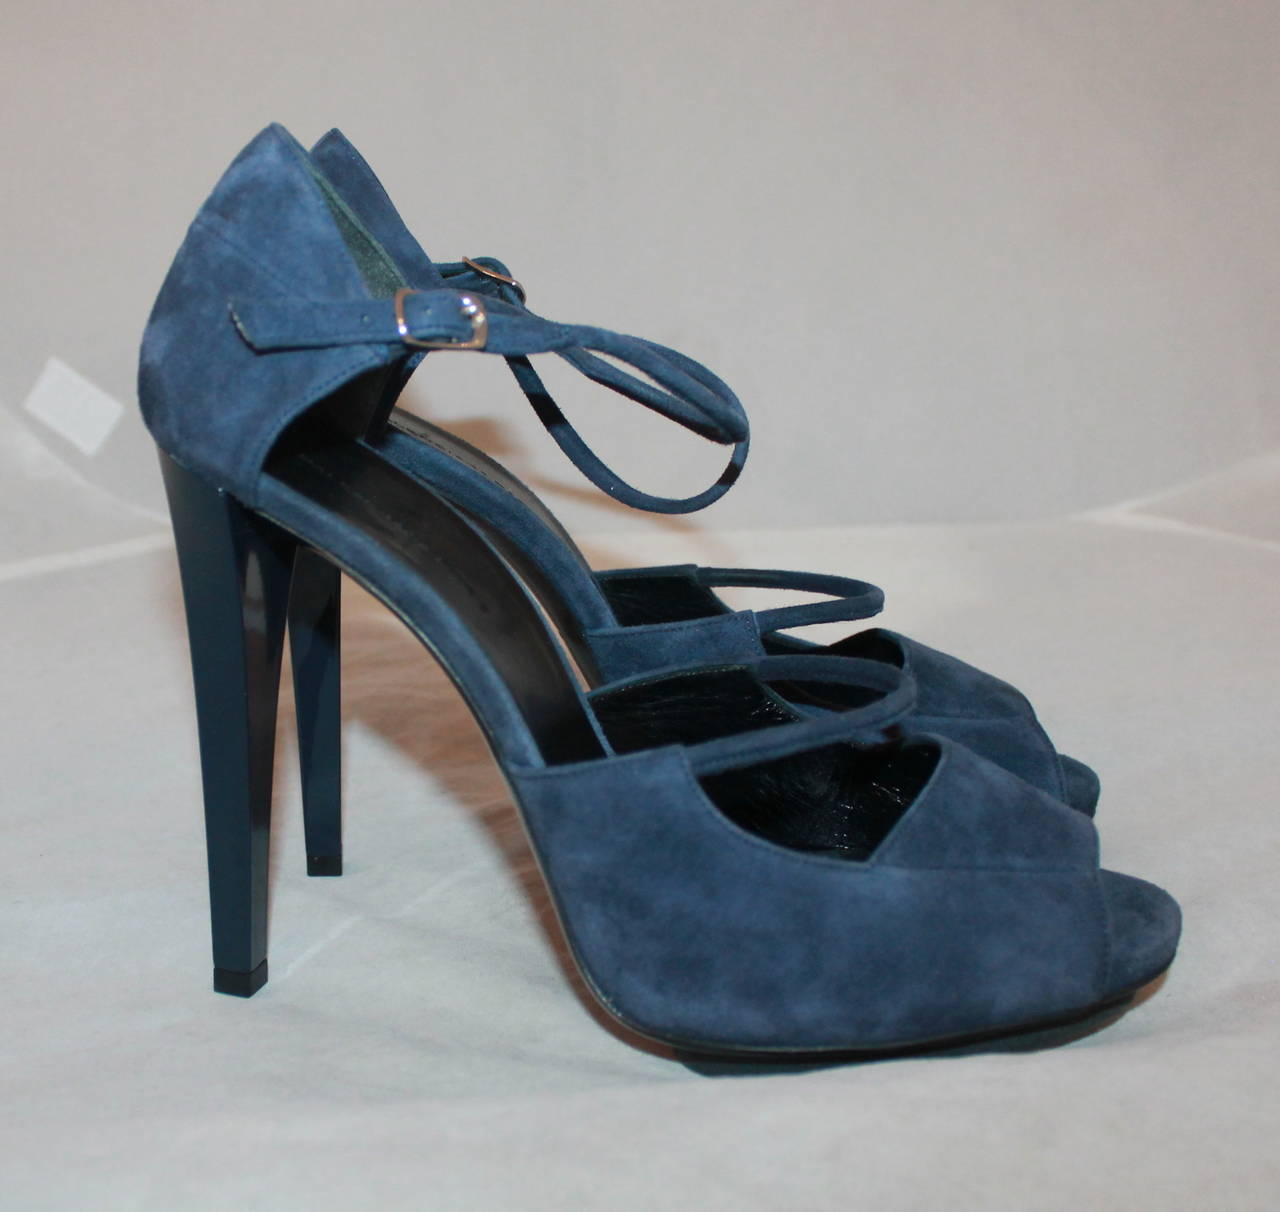 Balenciaga Navy Suede Strappy Platform Heels - 40. These shoes are in impeccable condition with very minor wear on the bottom.